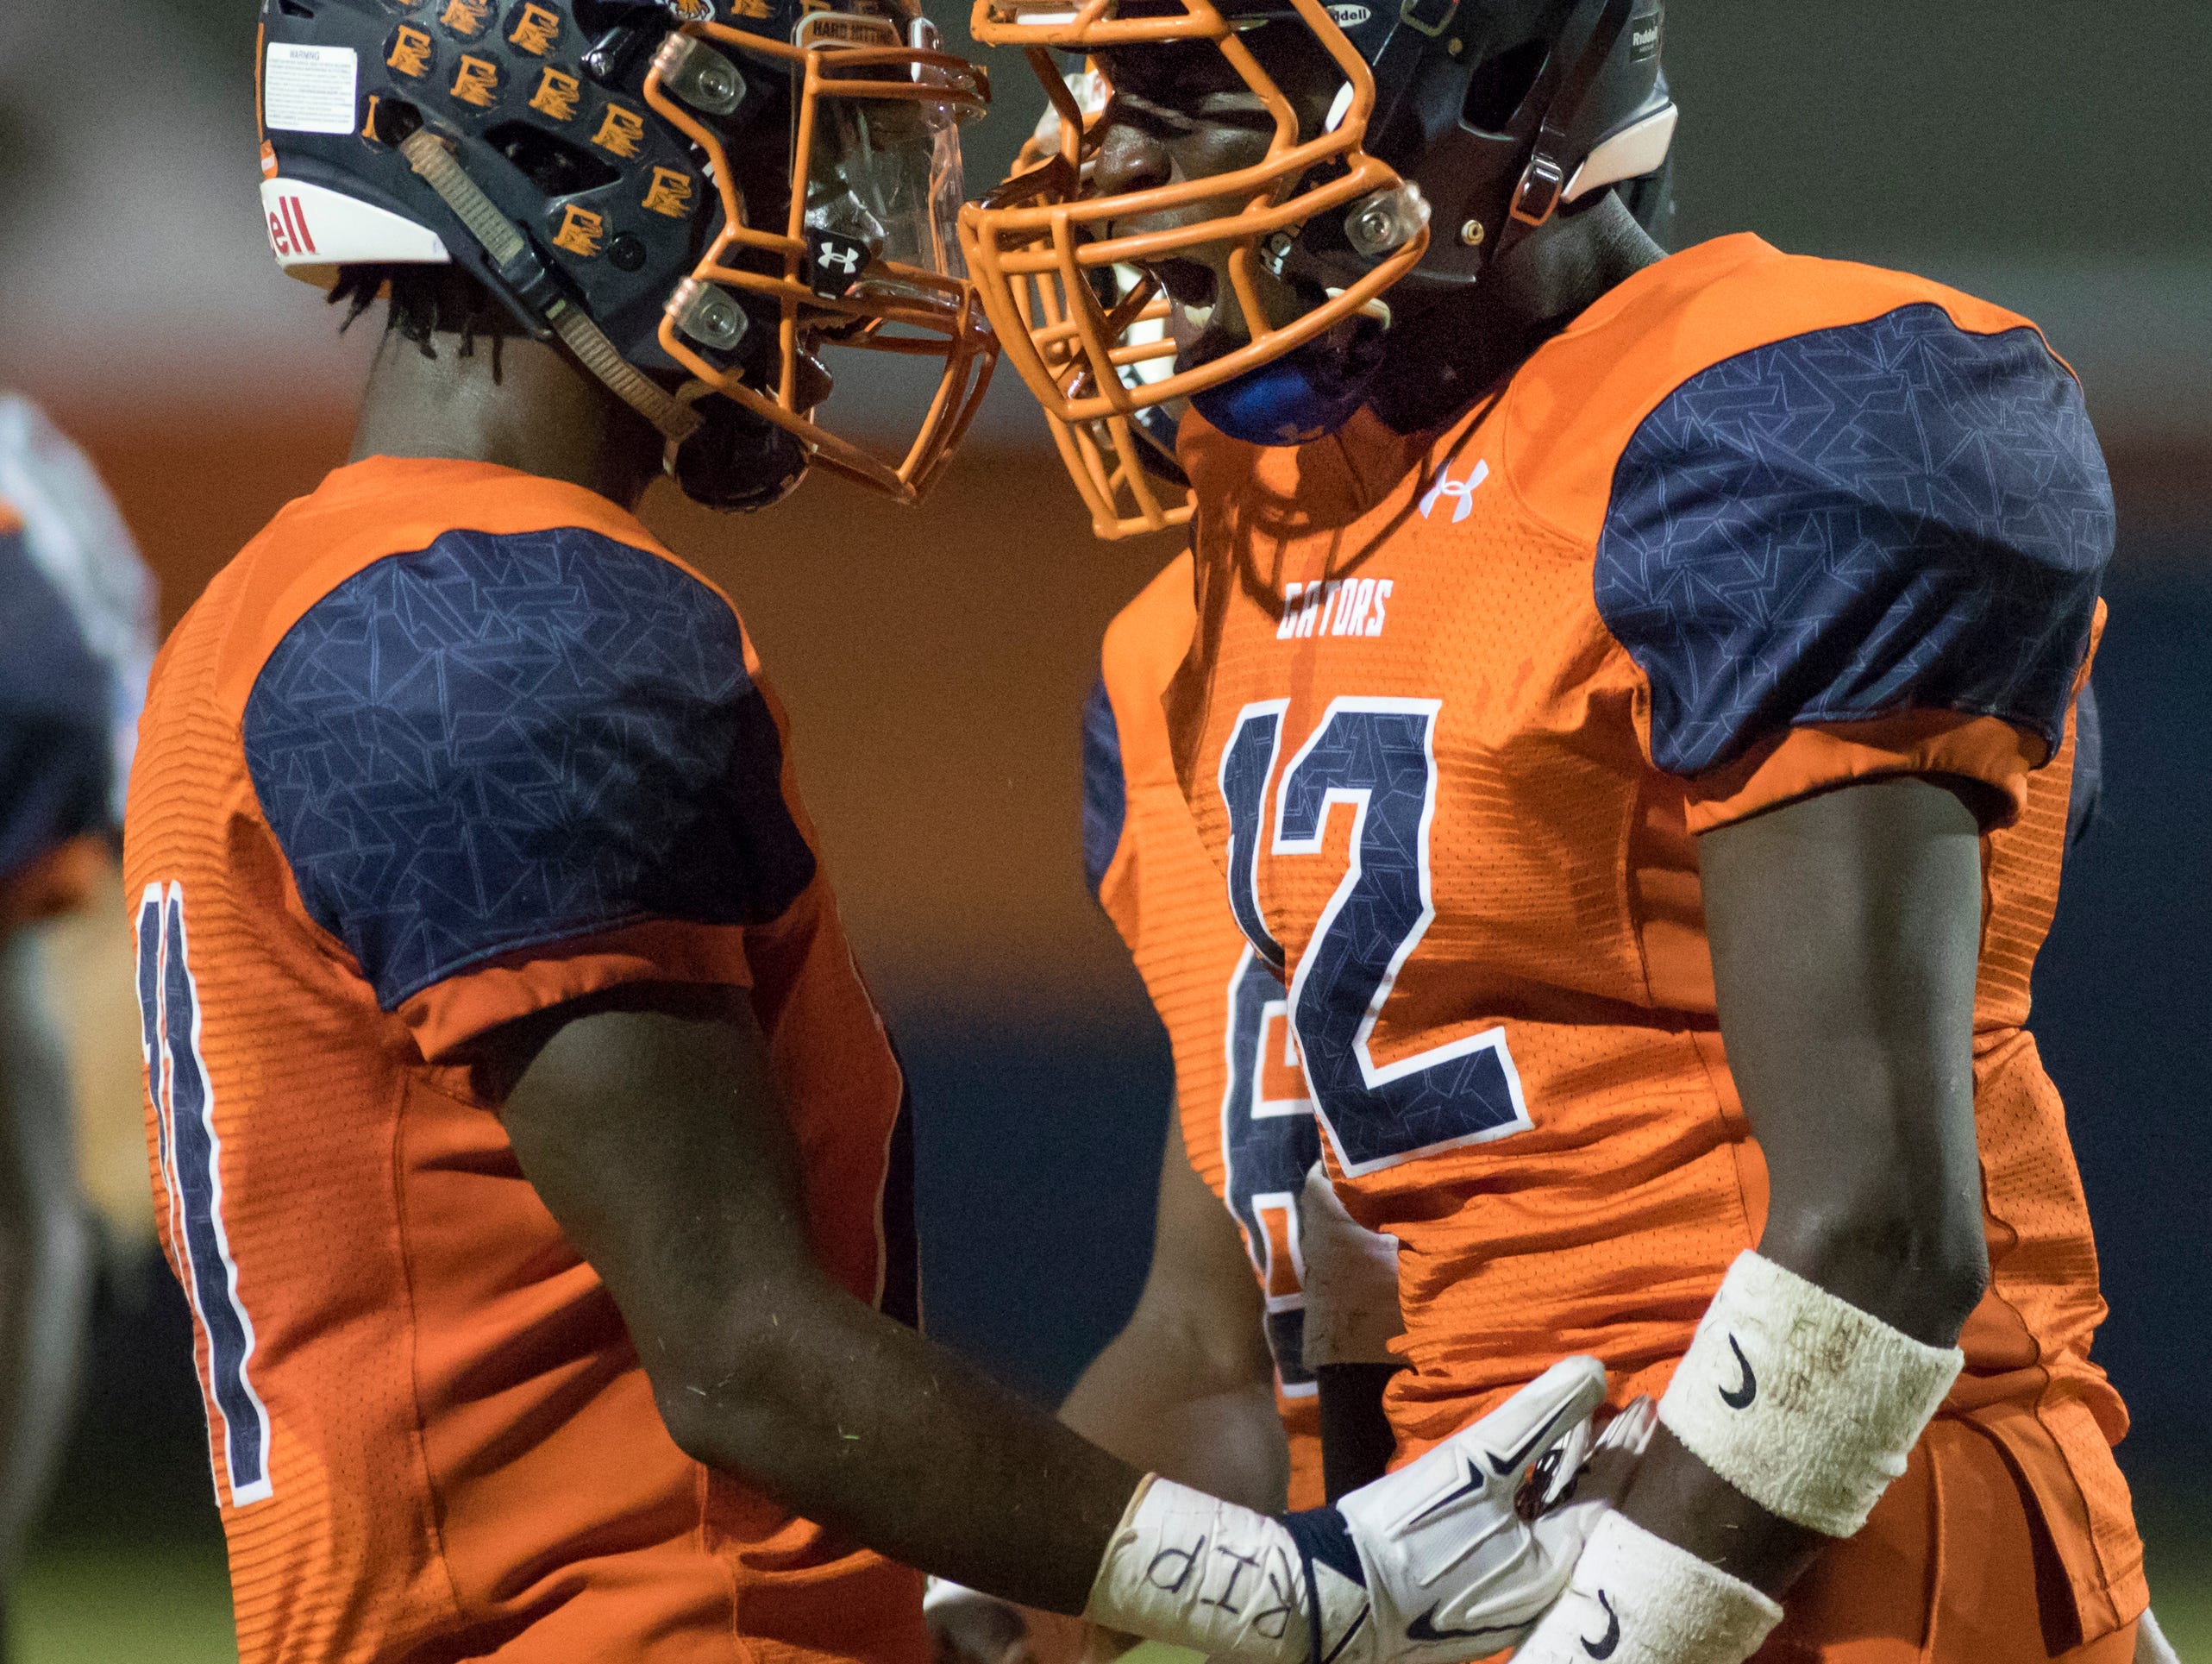 Martin McGhee (11) and Tre Lewis (12) get excited after scoring during the Pine Forest v Escambia football game on Friday, September 30, 2016.